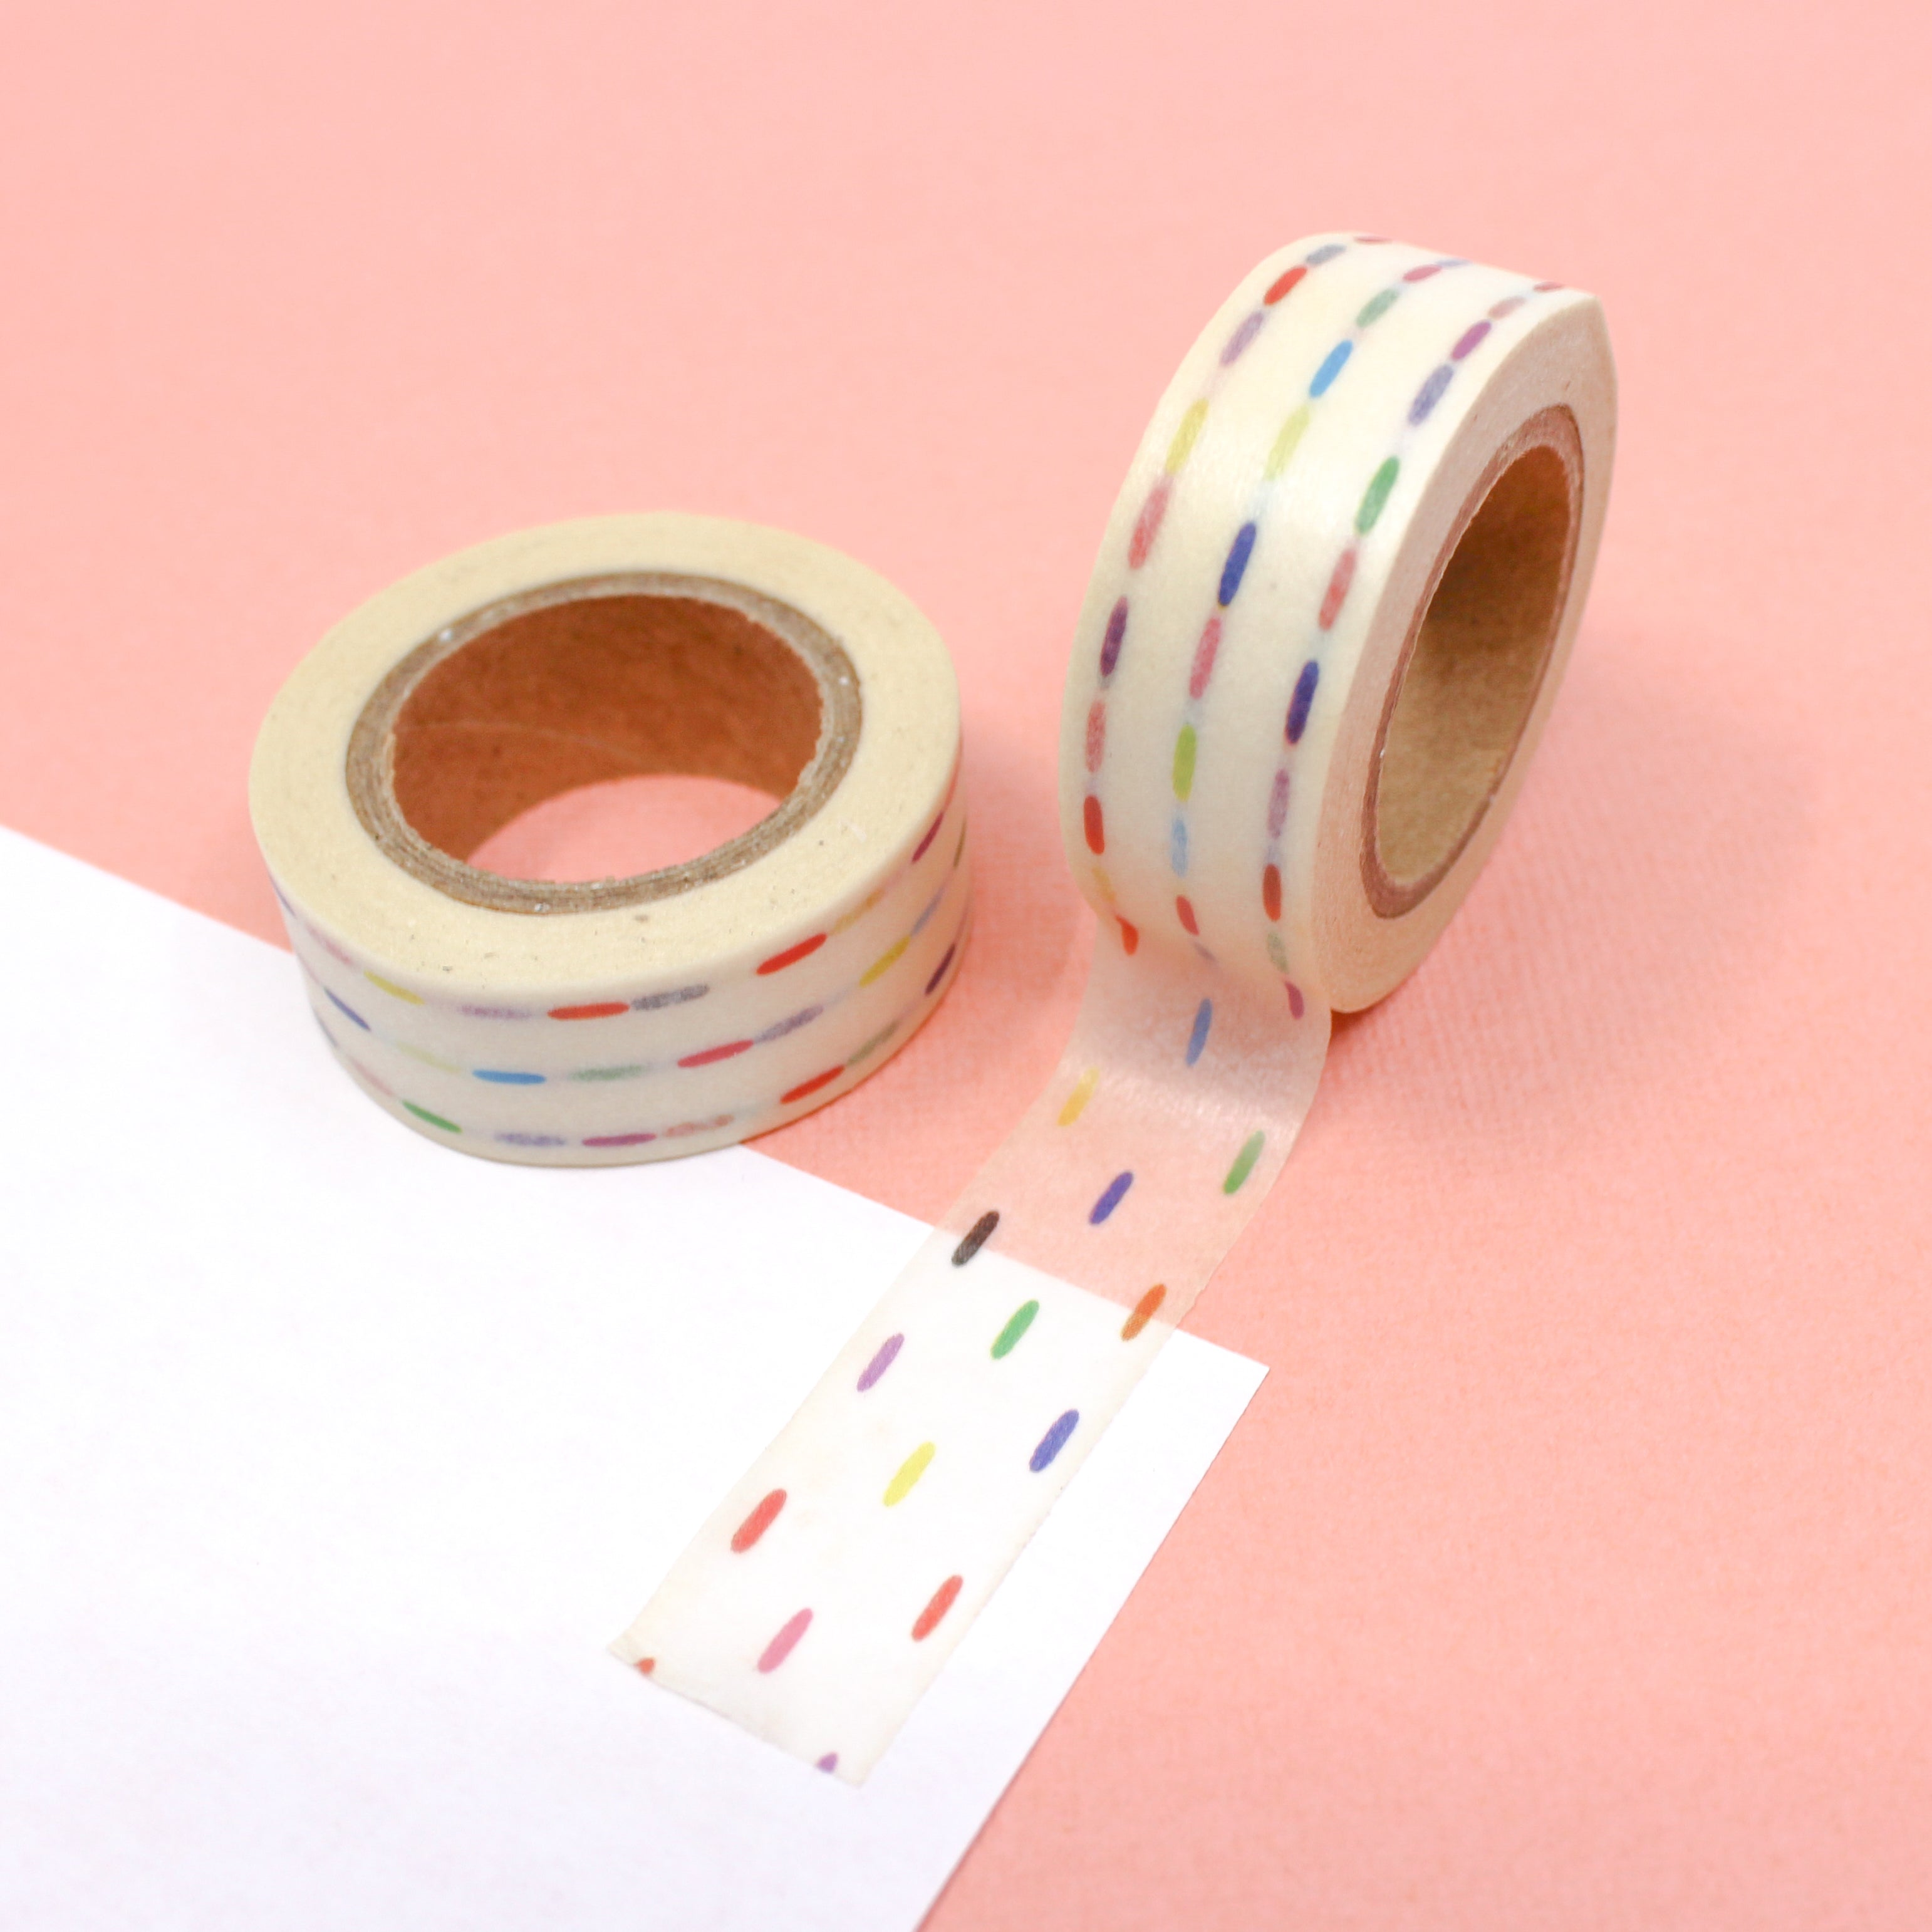 This is a rainbow color dashed lines or dots pattern washi tape from BBB Supplies Craft Shop